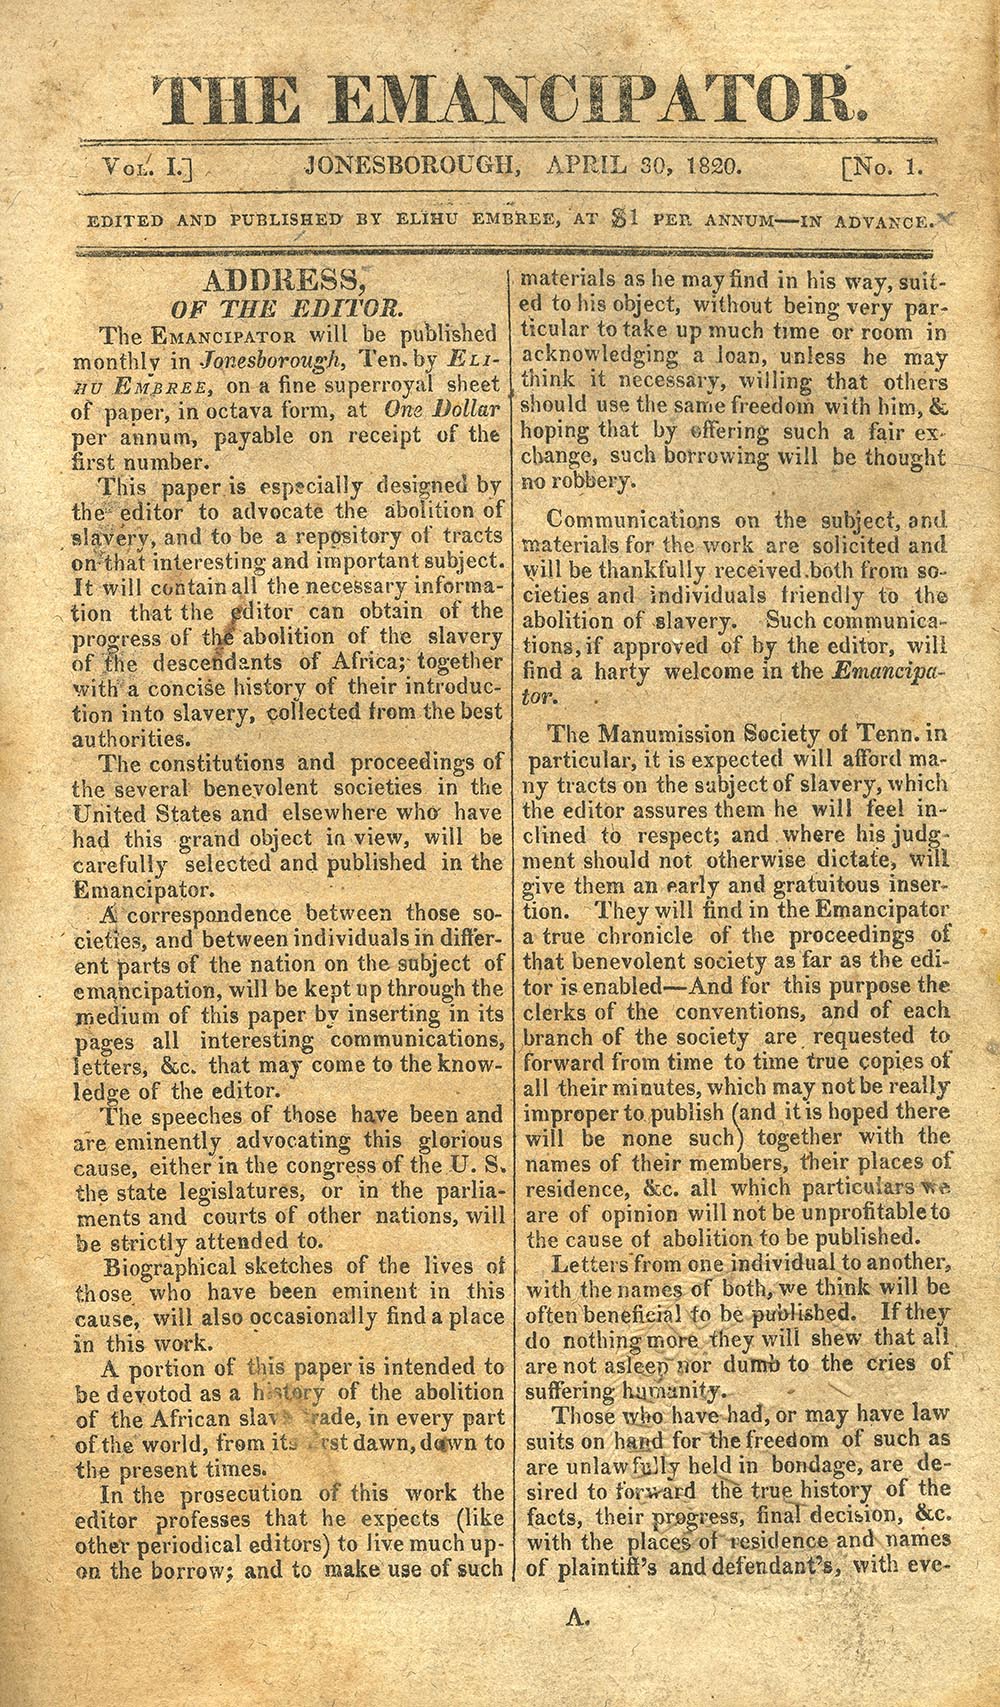 The Emancipator, one of America’s first anti-slavery newspapers